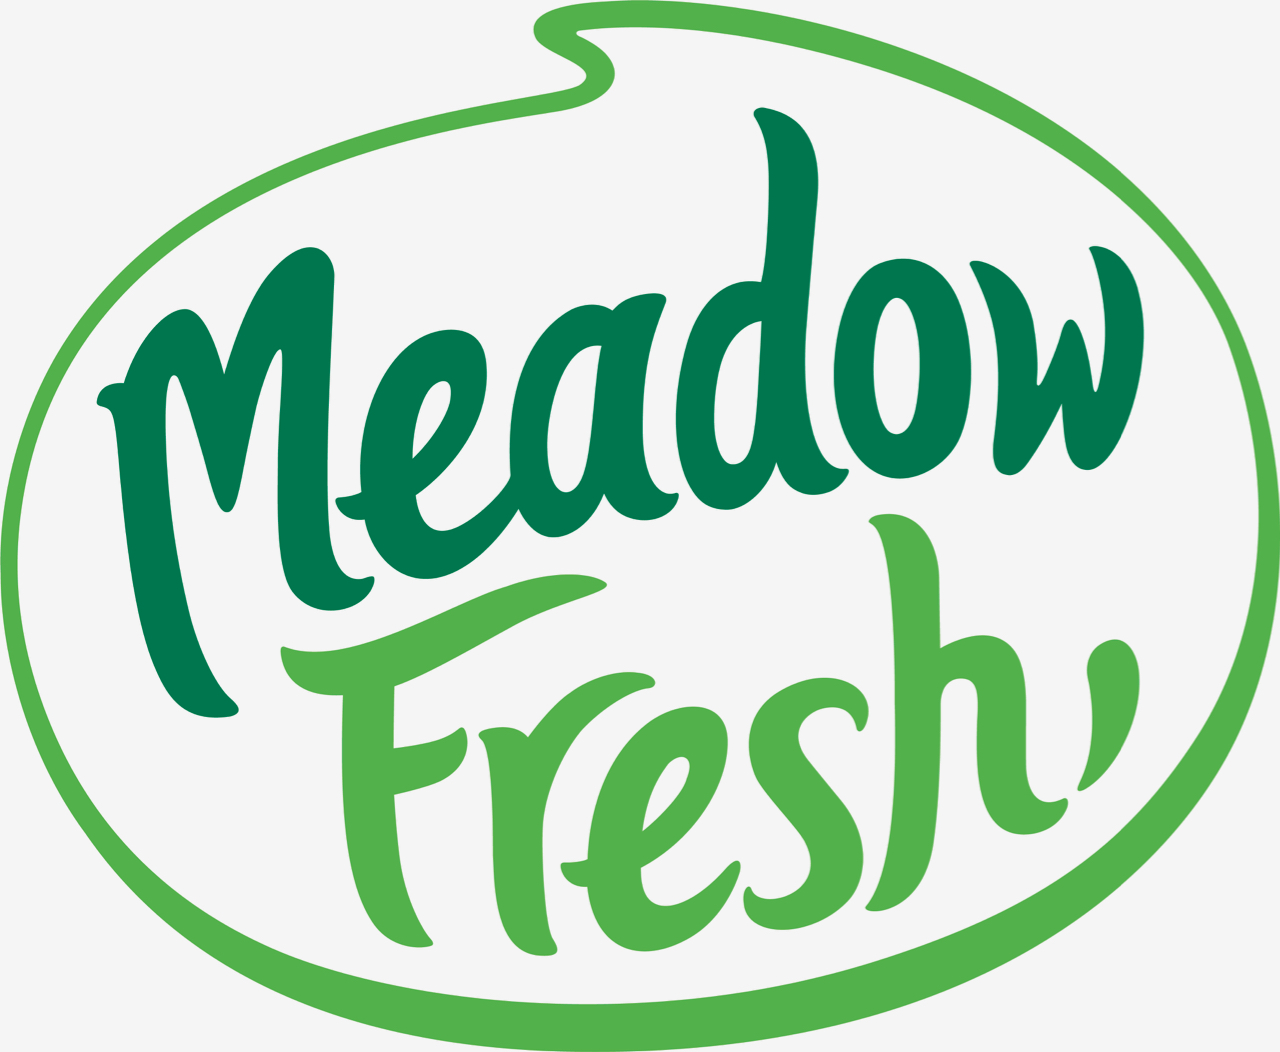 Meadow fresh logo withers and co 1